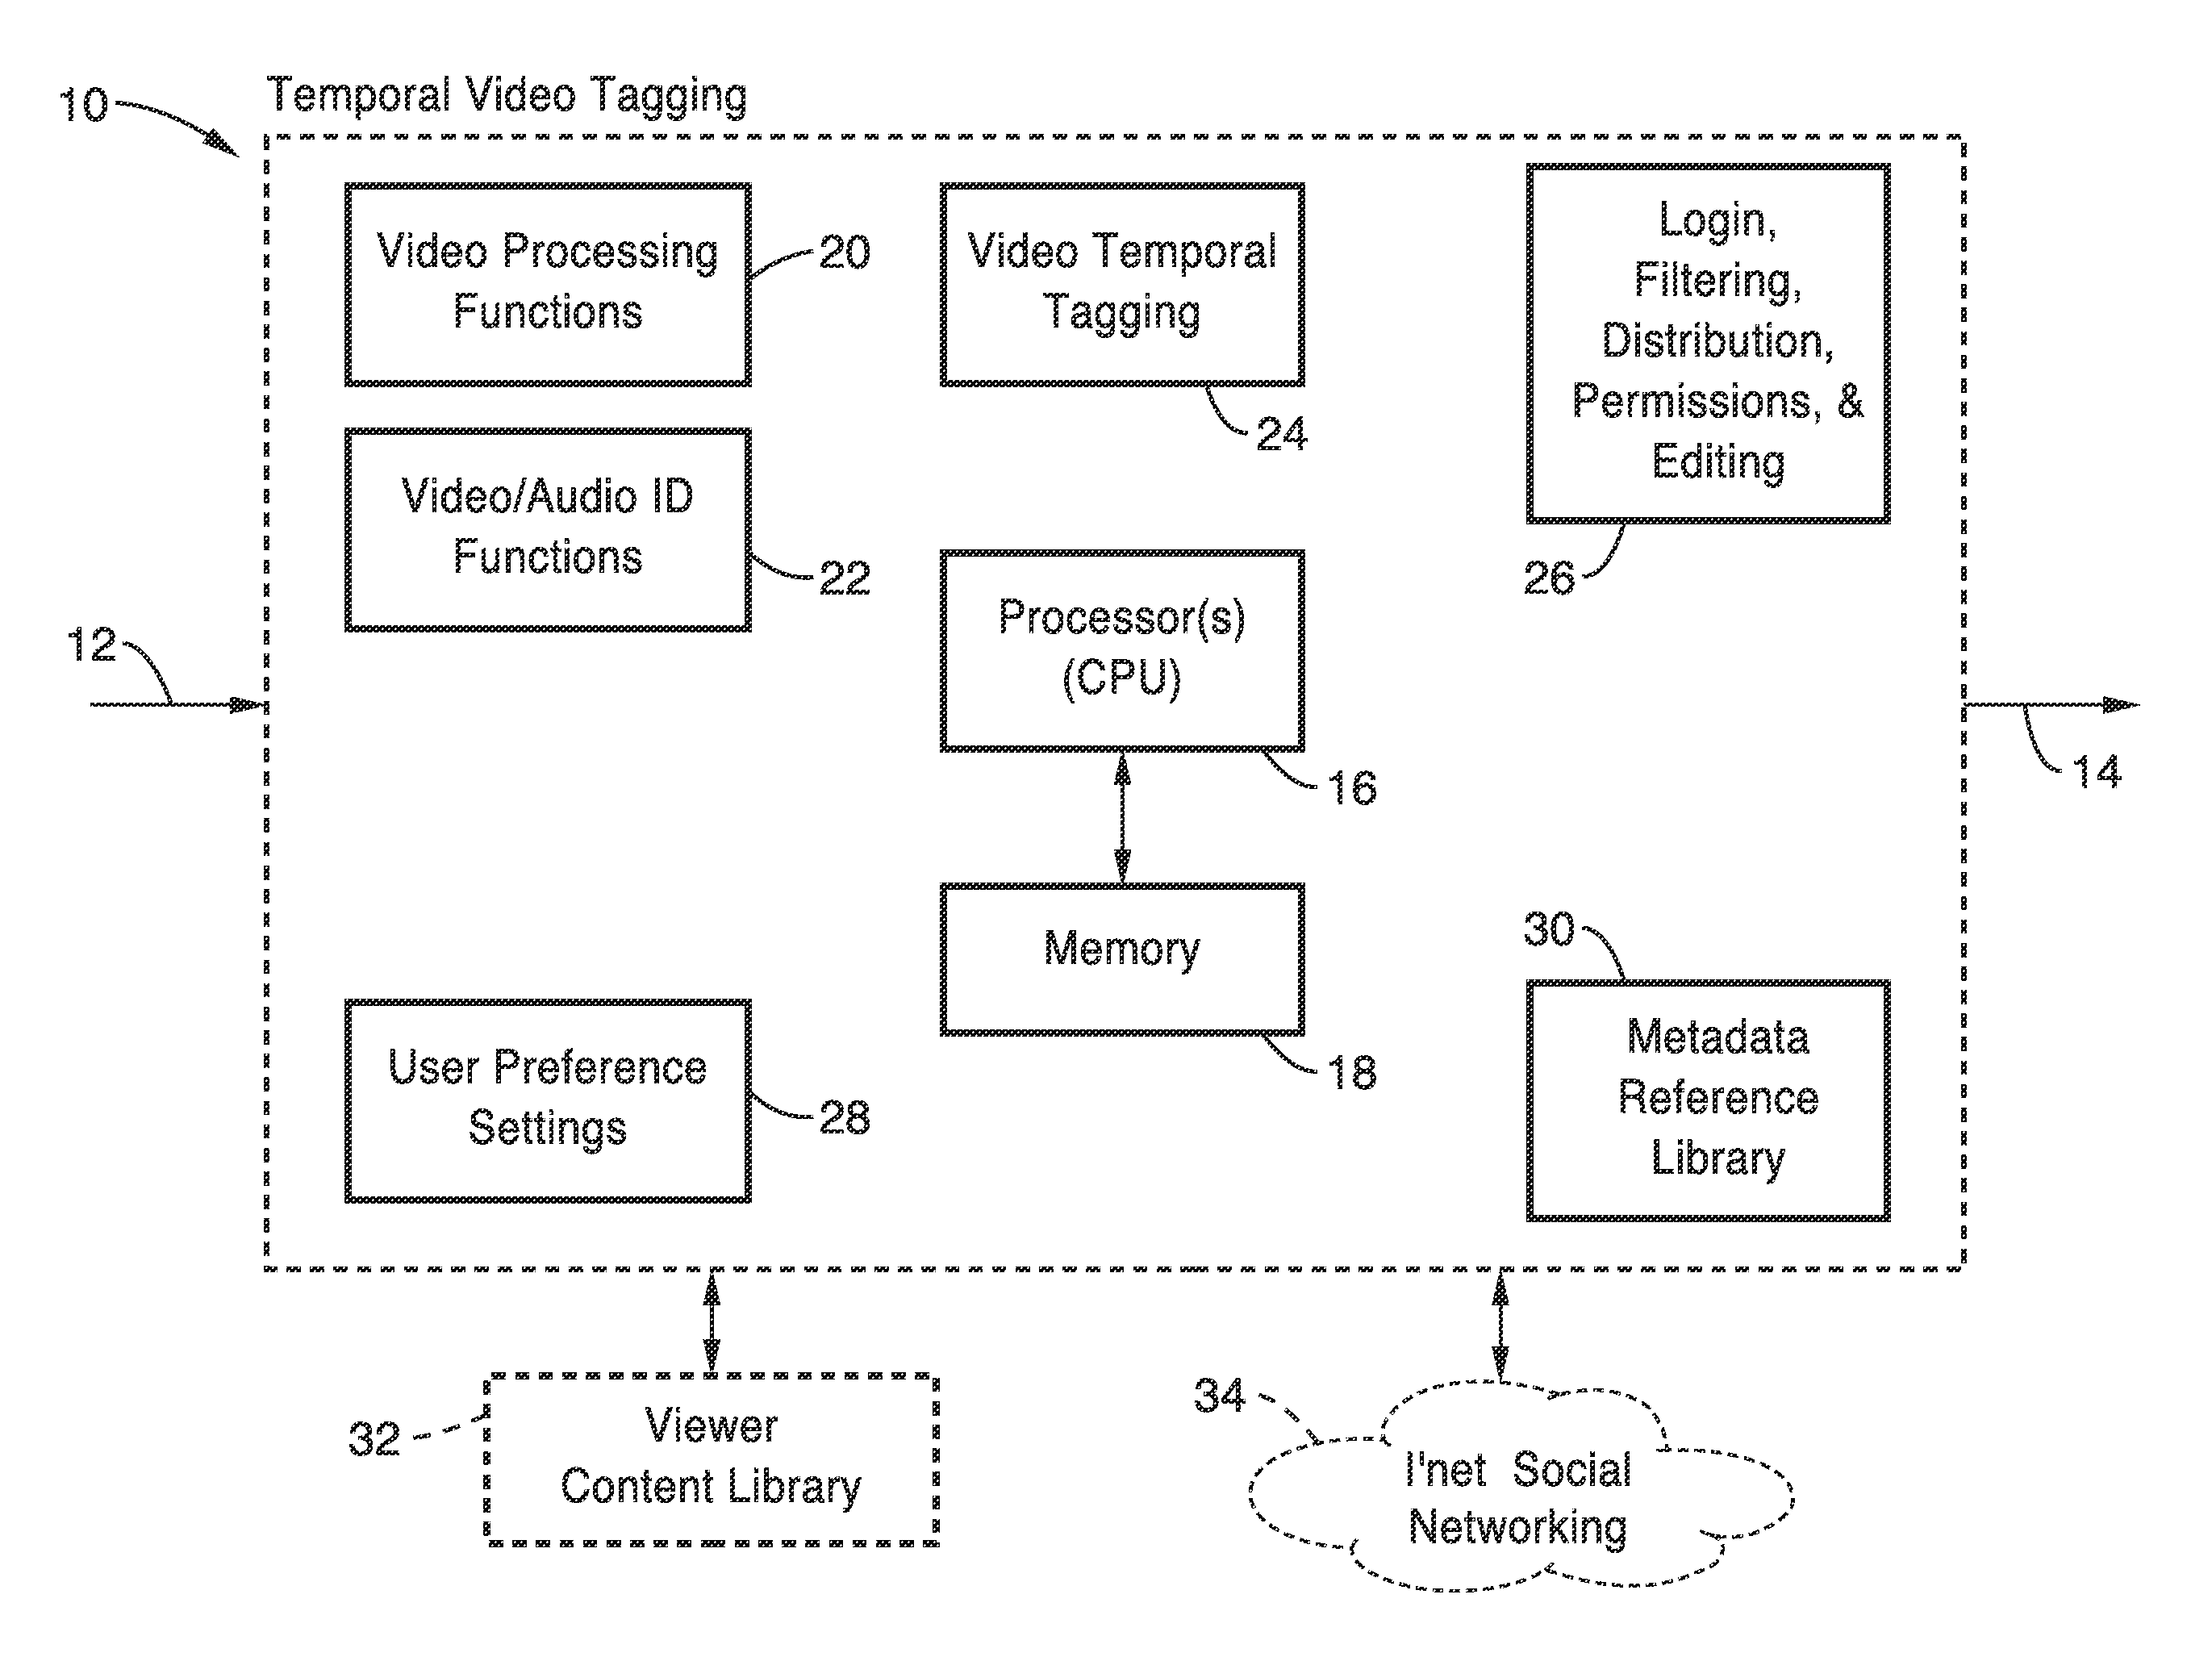 Temporal video tagging and distribution